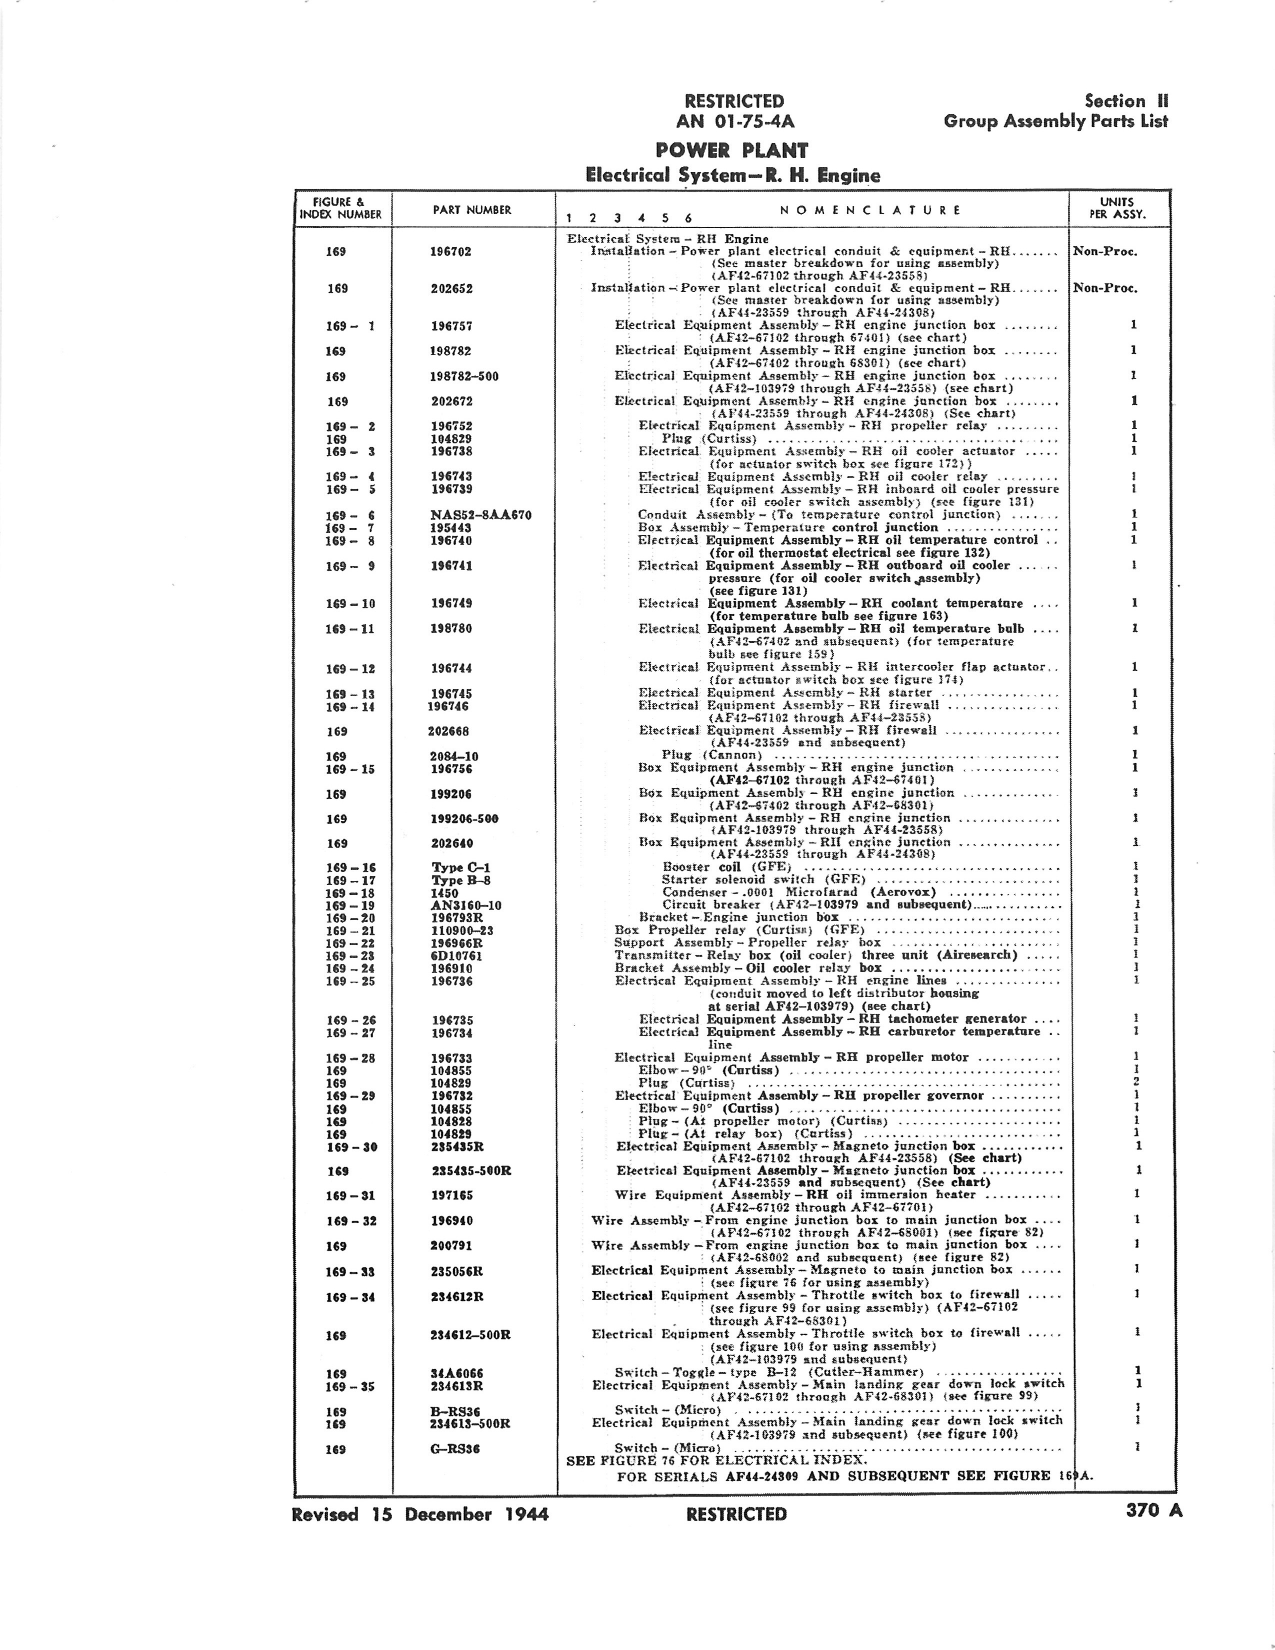 Sample page 165 from AirCorps Library document: Airplane Parts Catalog - P-38H, P-38J, P-38L, F-5B - Dec 1944